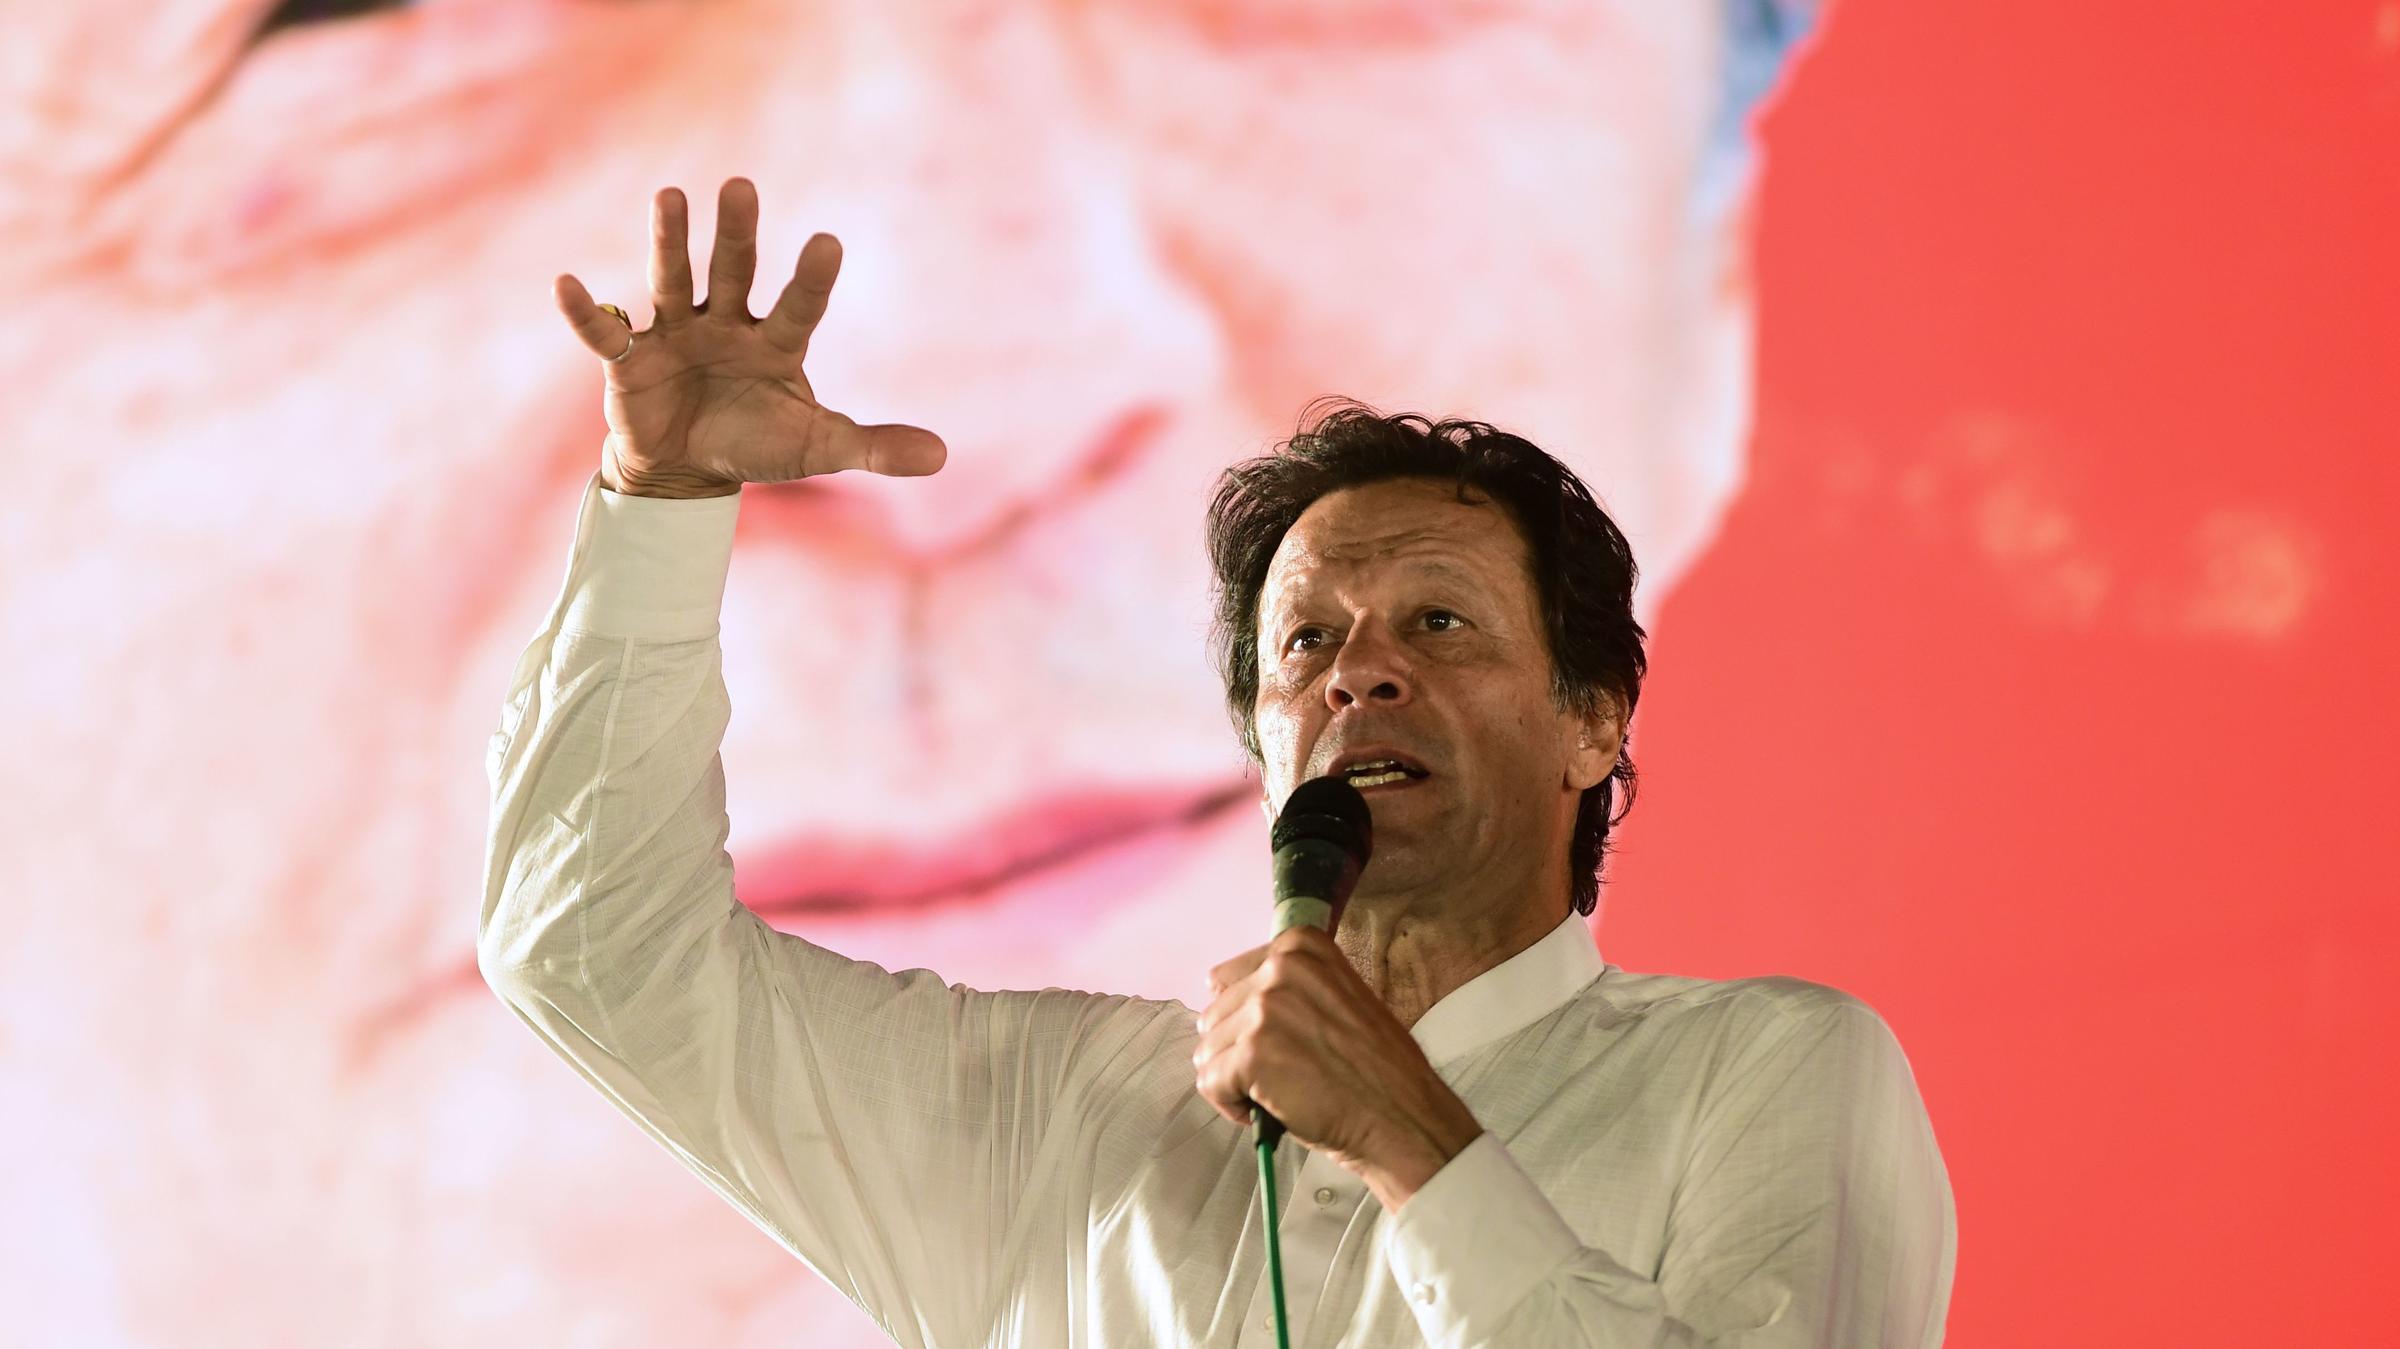 Pakistan's Prime Minister Imran Khan addresses a political campaign rally